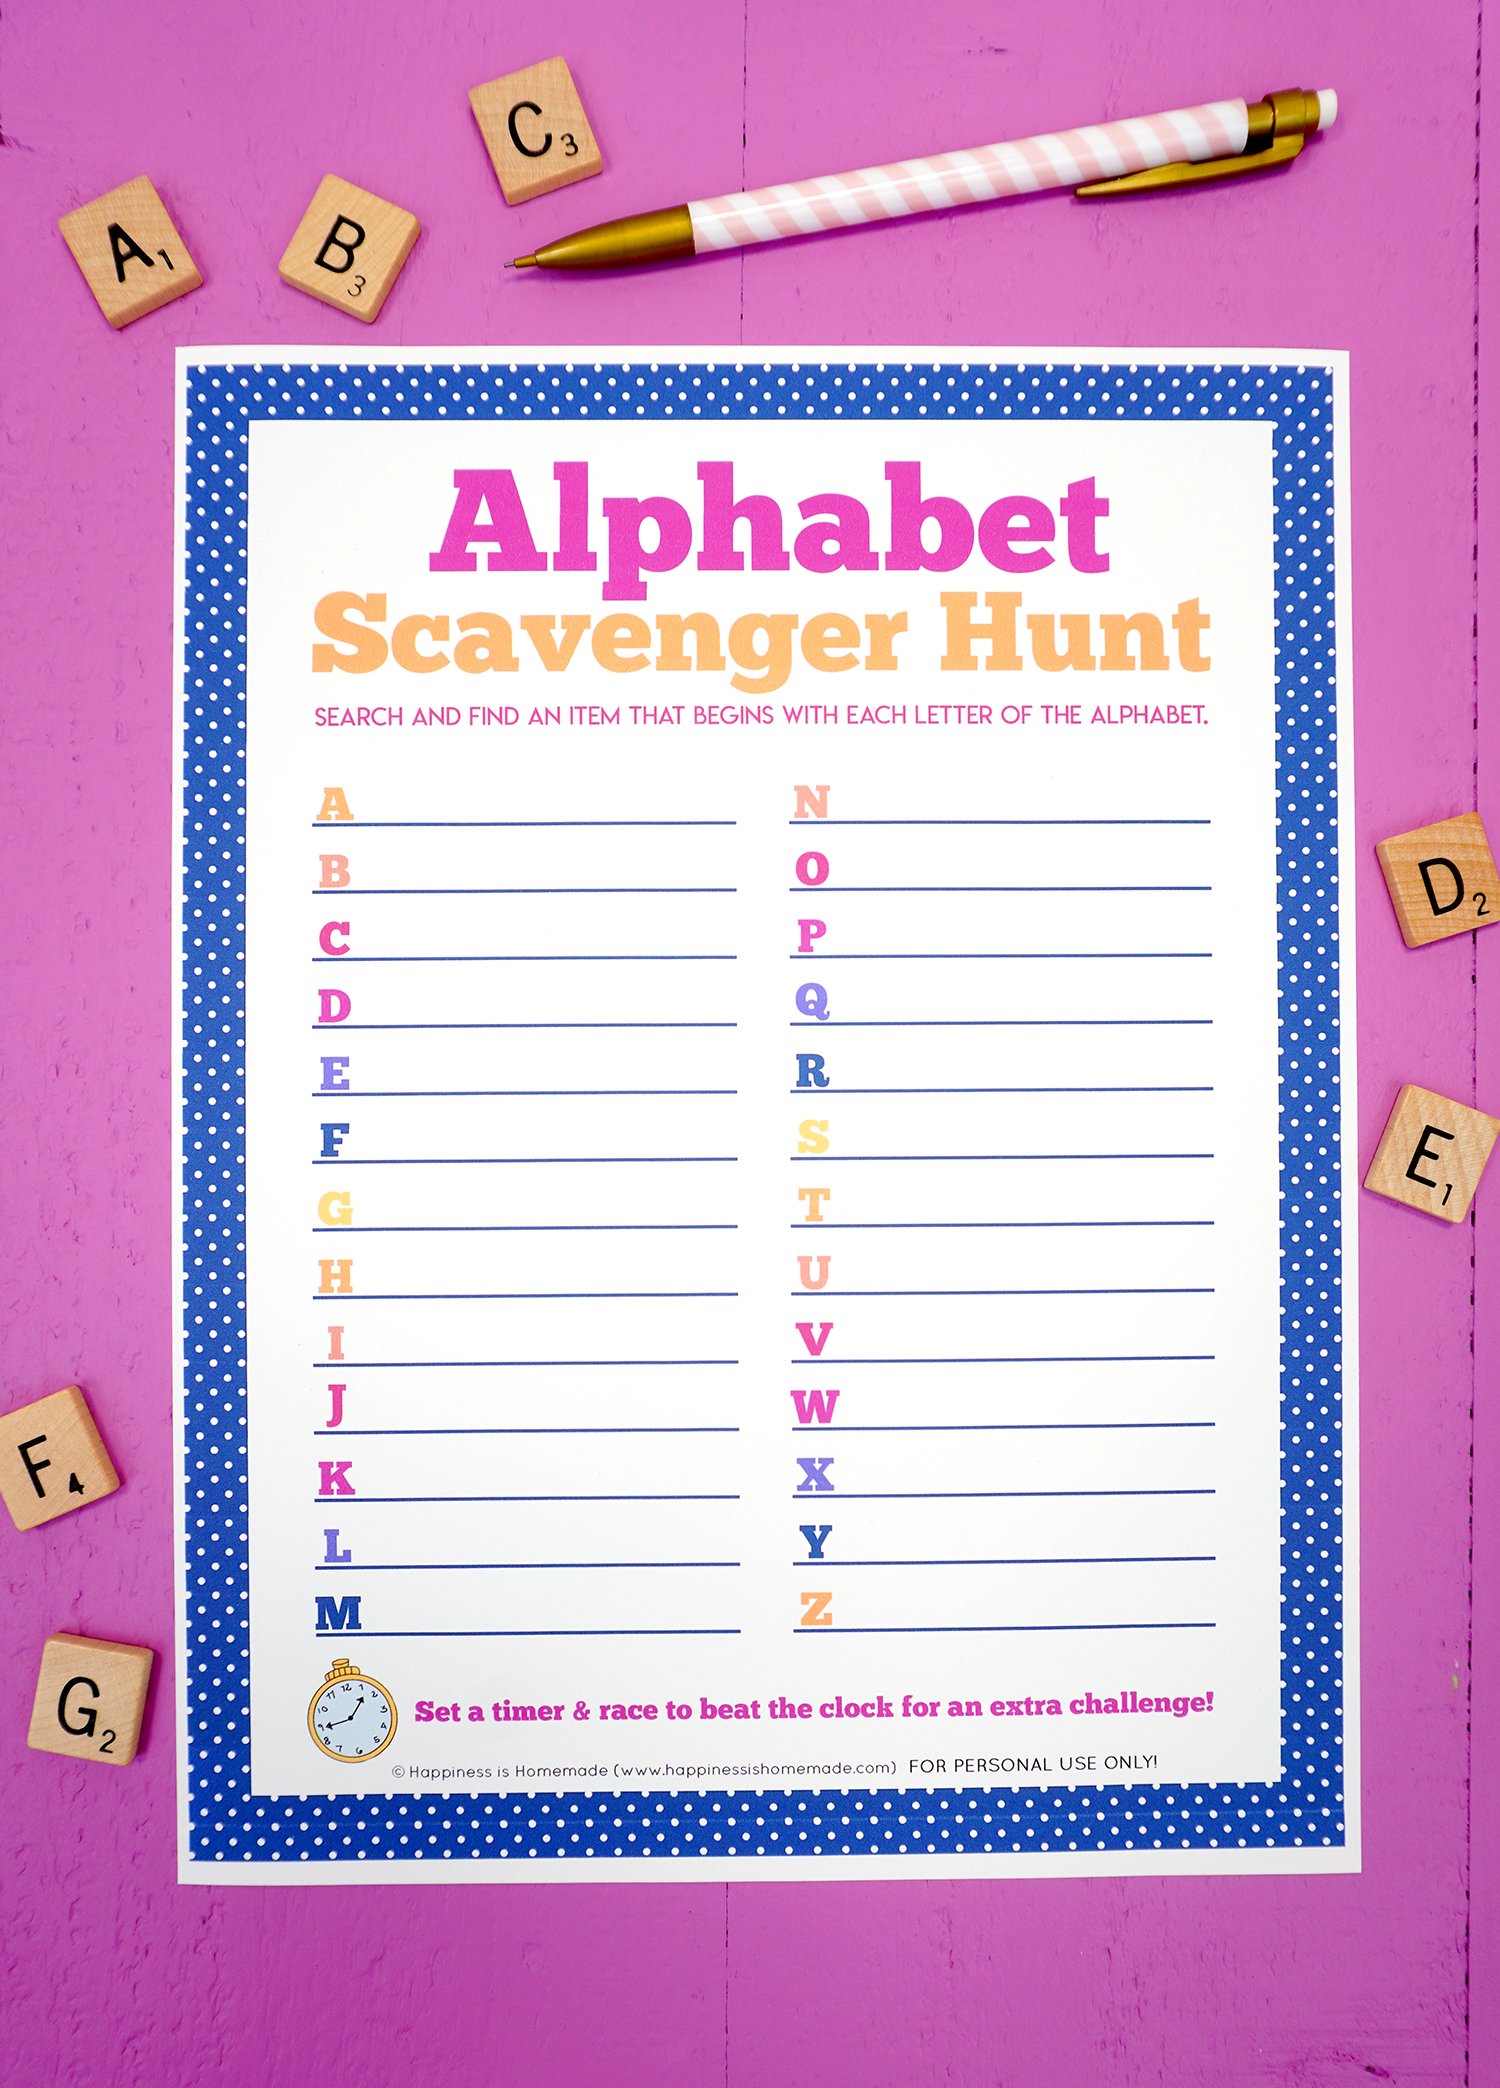 Alphabet scavenger hunt printable on purple background with pink striped pencil and ABCDEFG Scrabble tiles